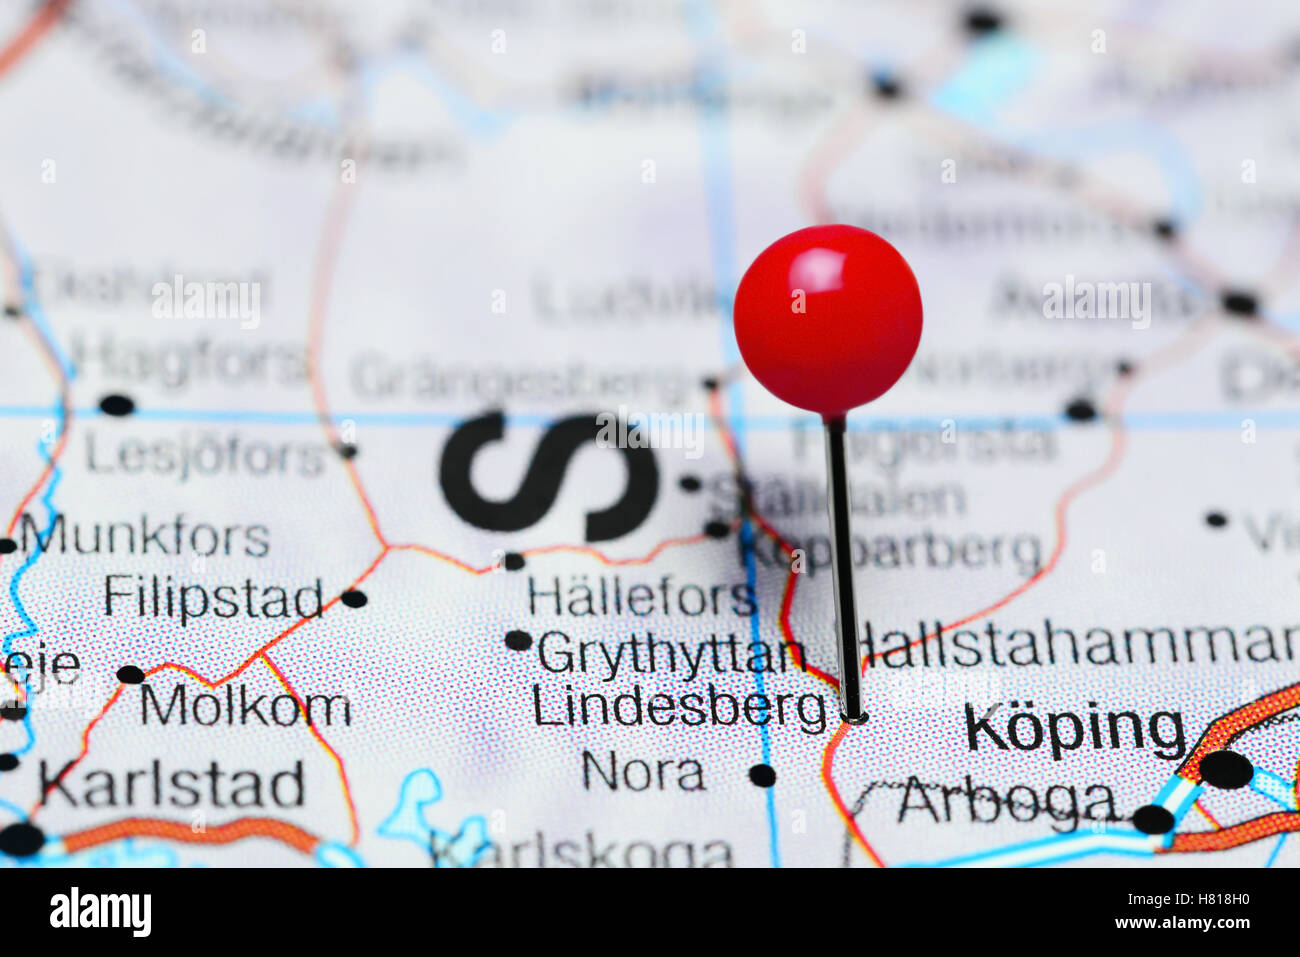 Lindesberg pinned on a map of Sweden Stock Photo